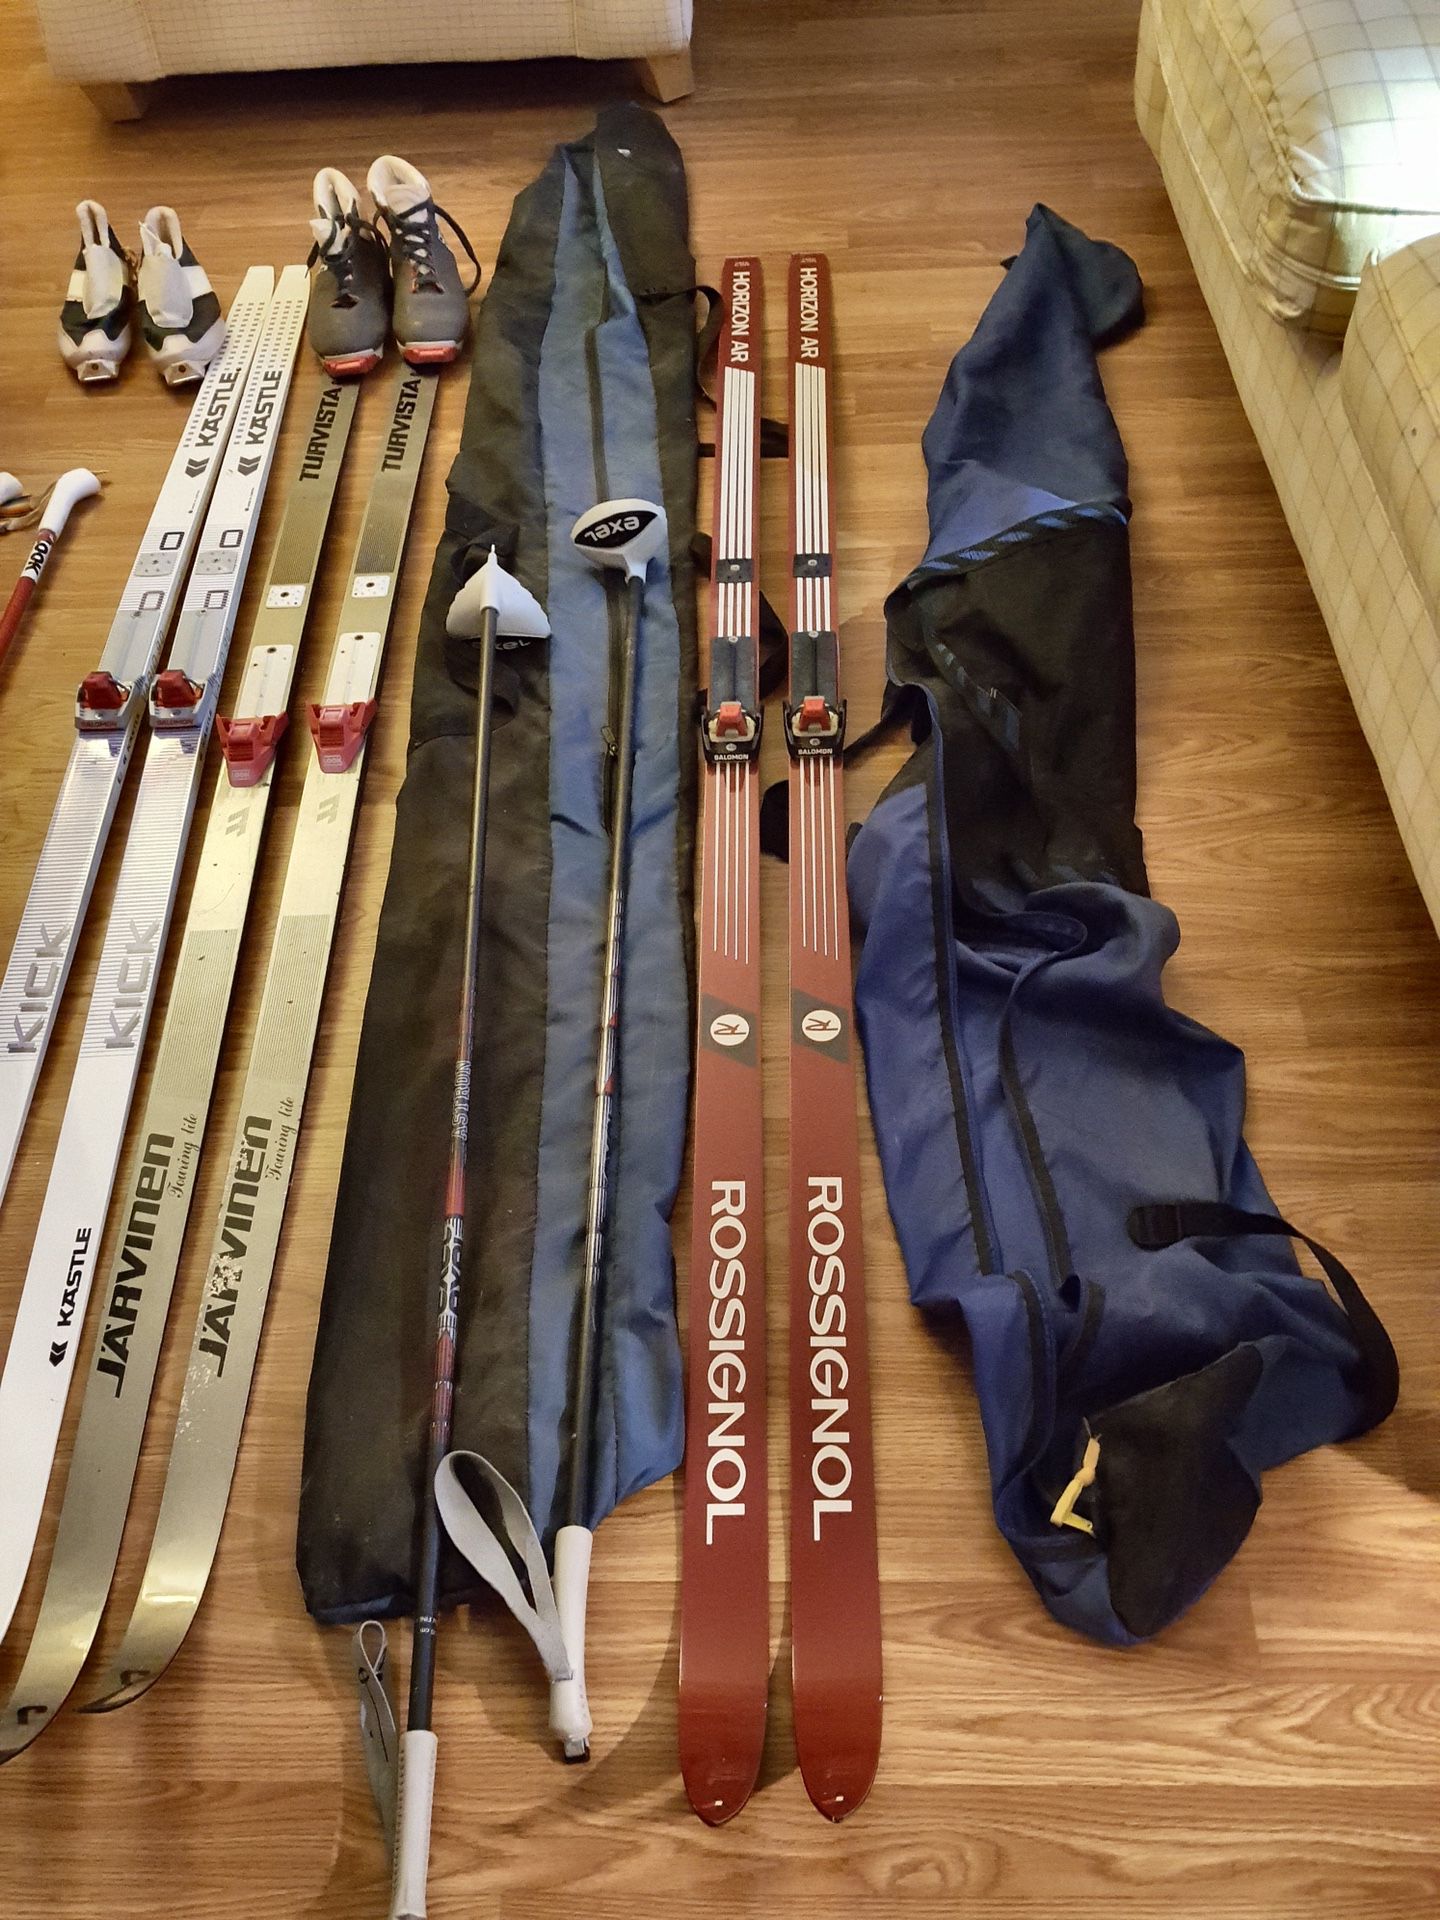 3 Pair of Cross County Skis with Poles 2 Bags Speed Wax Included